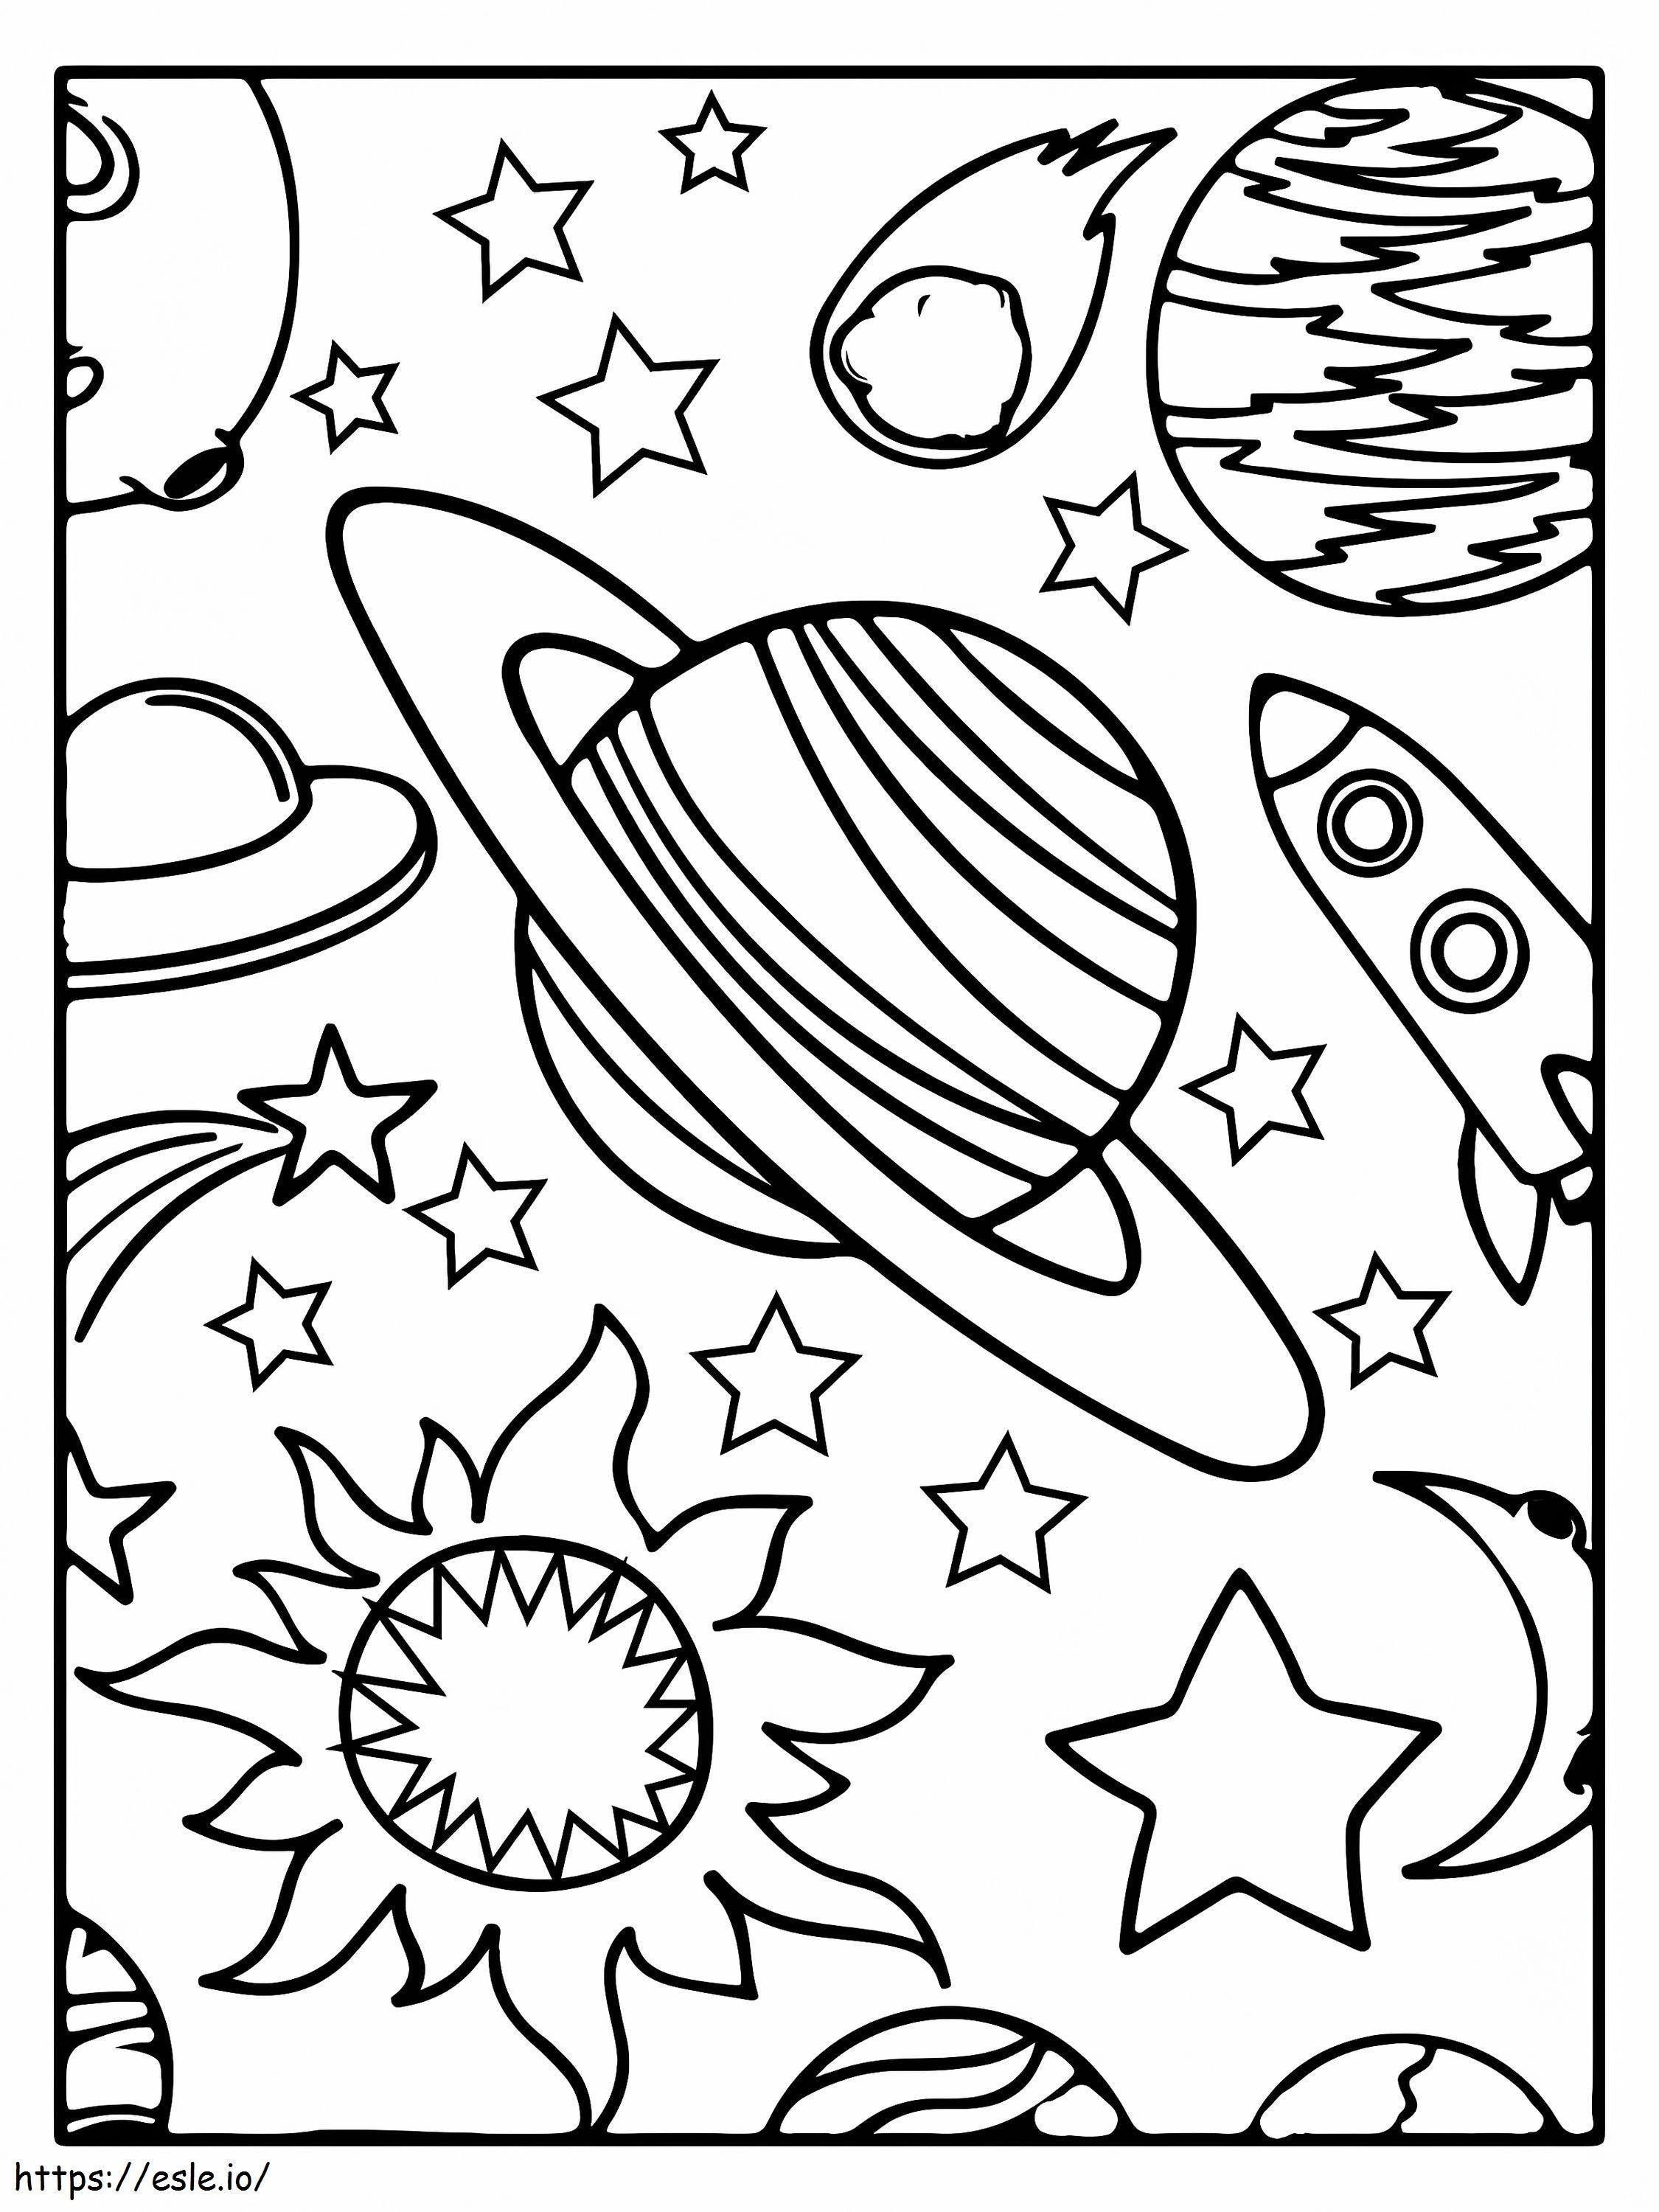 Saturn And Rockets coloring page